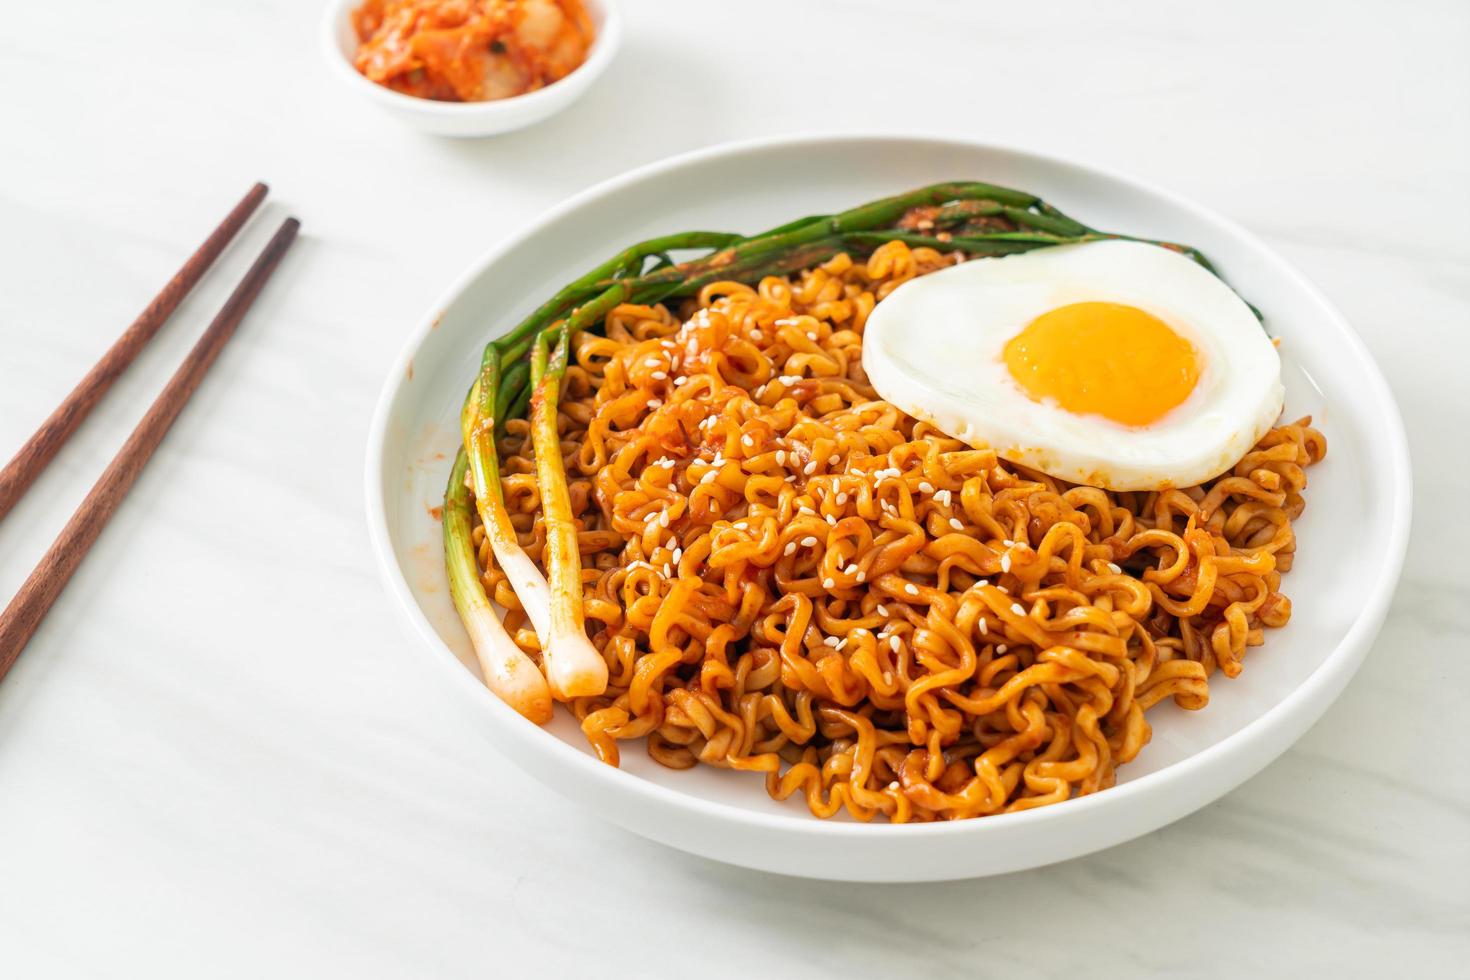 dried Korean spicy instant noodles with fried egg photo